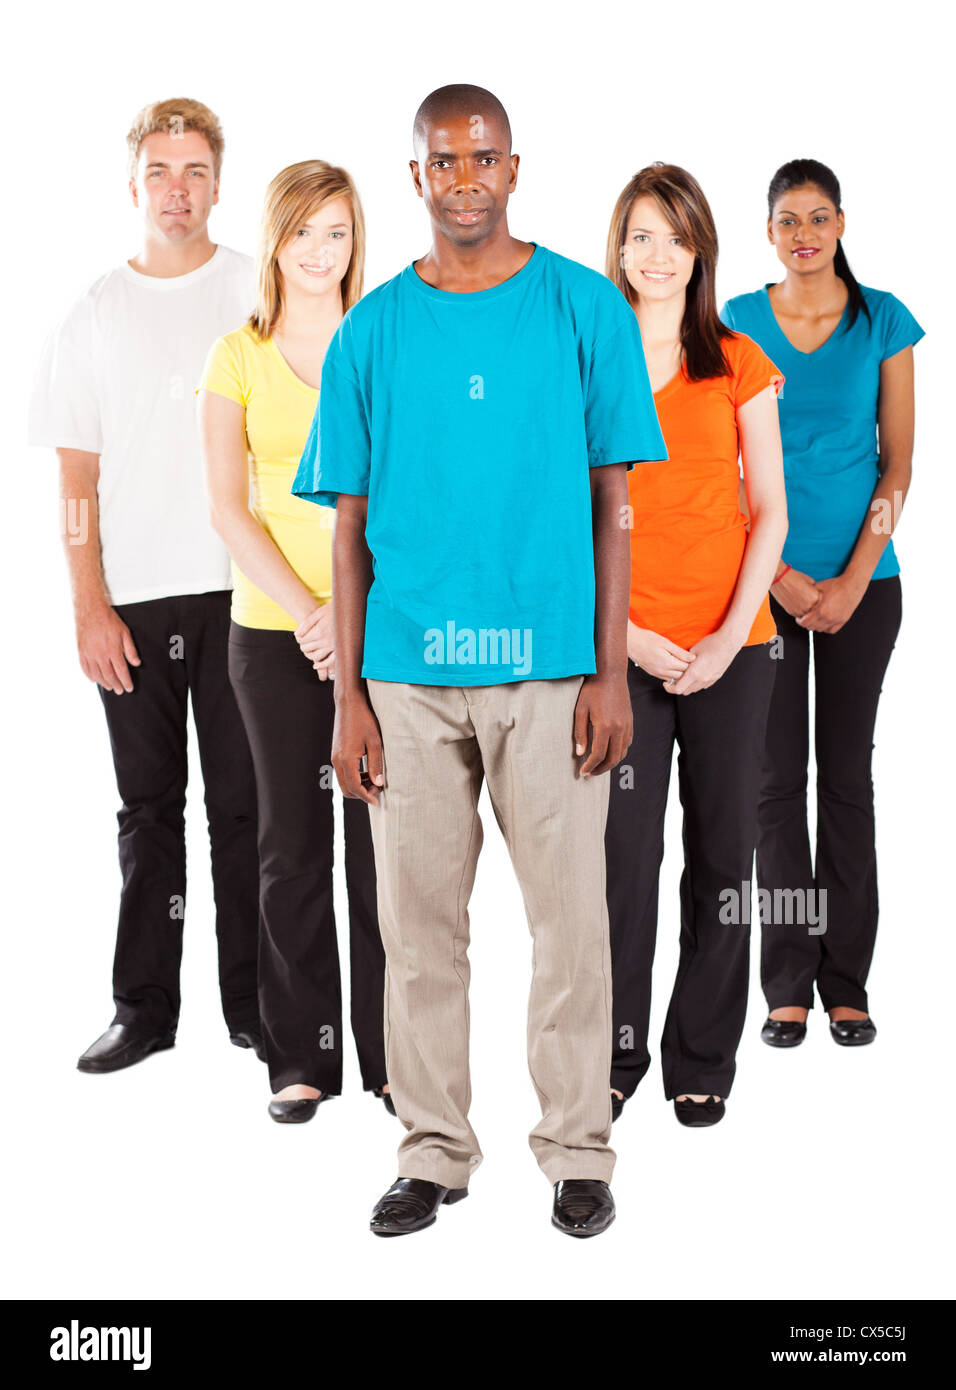 group of young diverse people on white background Stock Photo